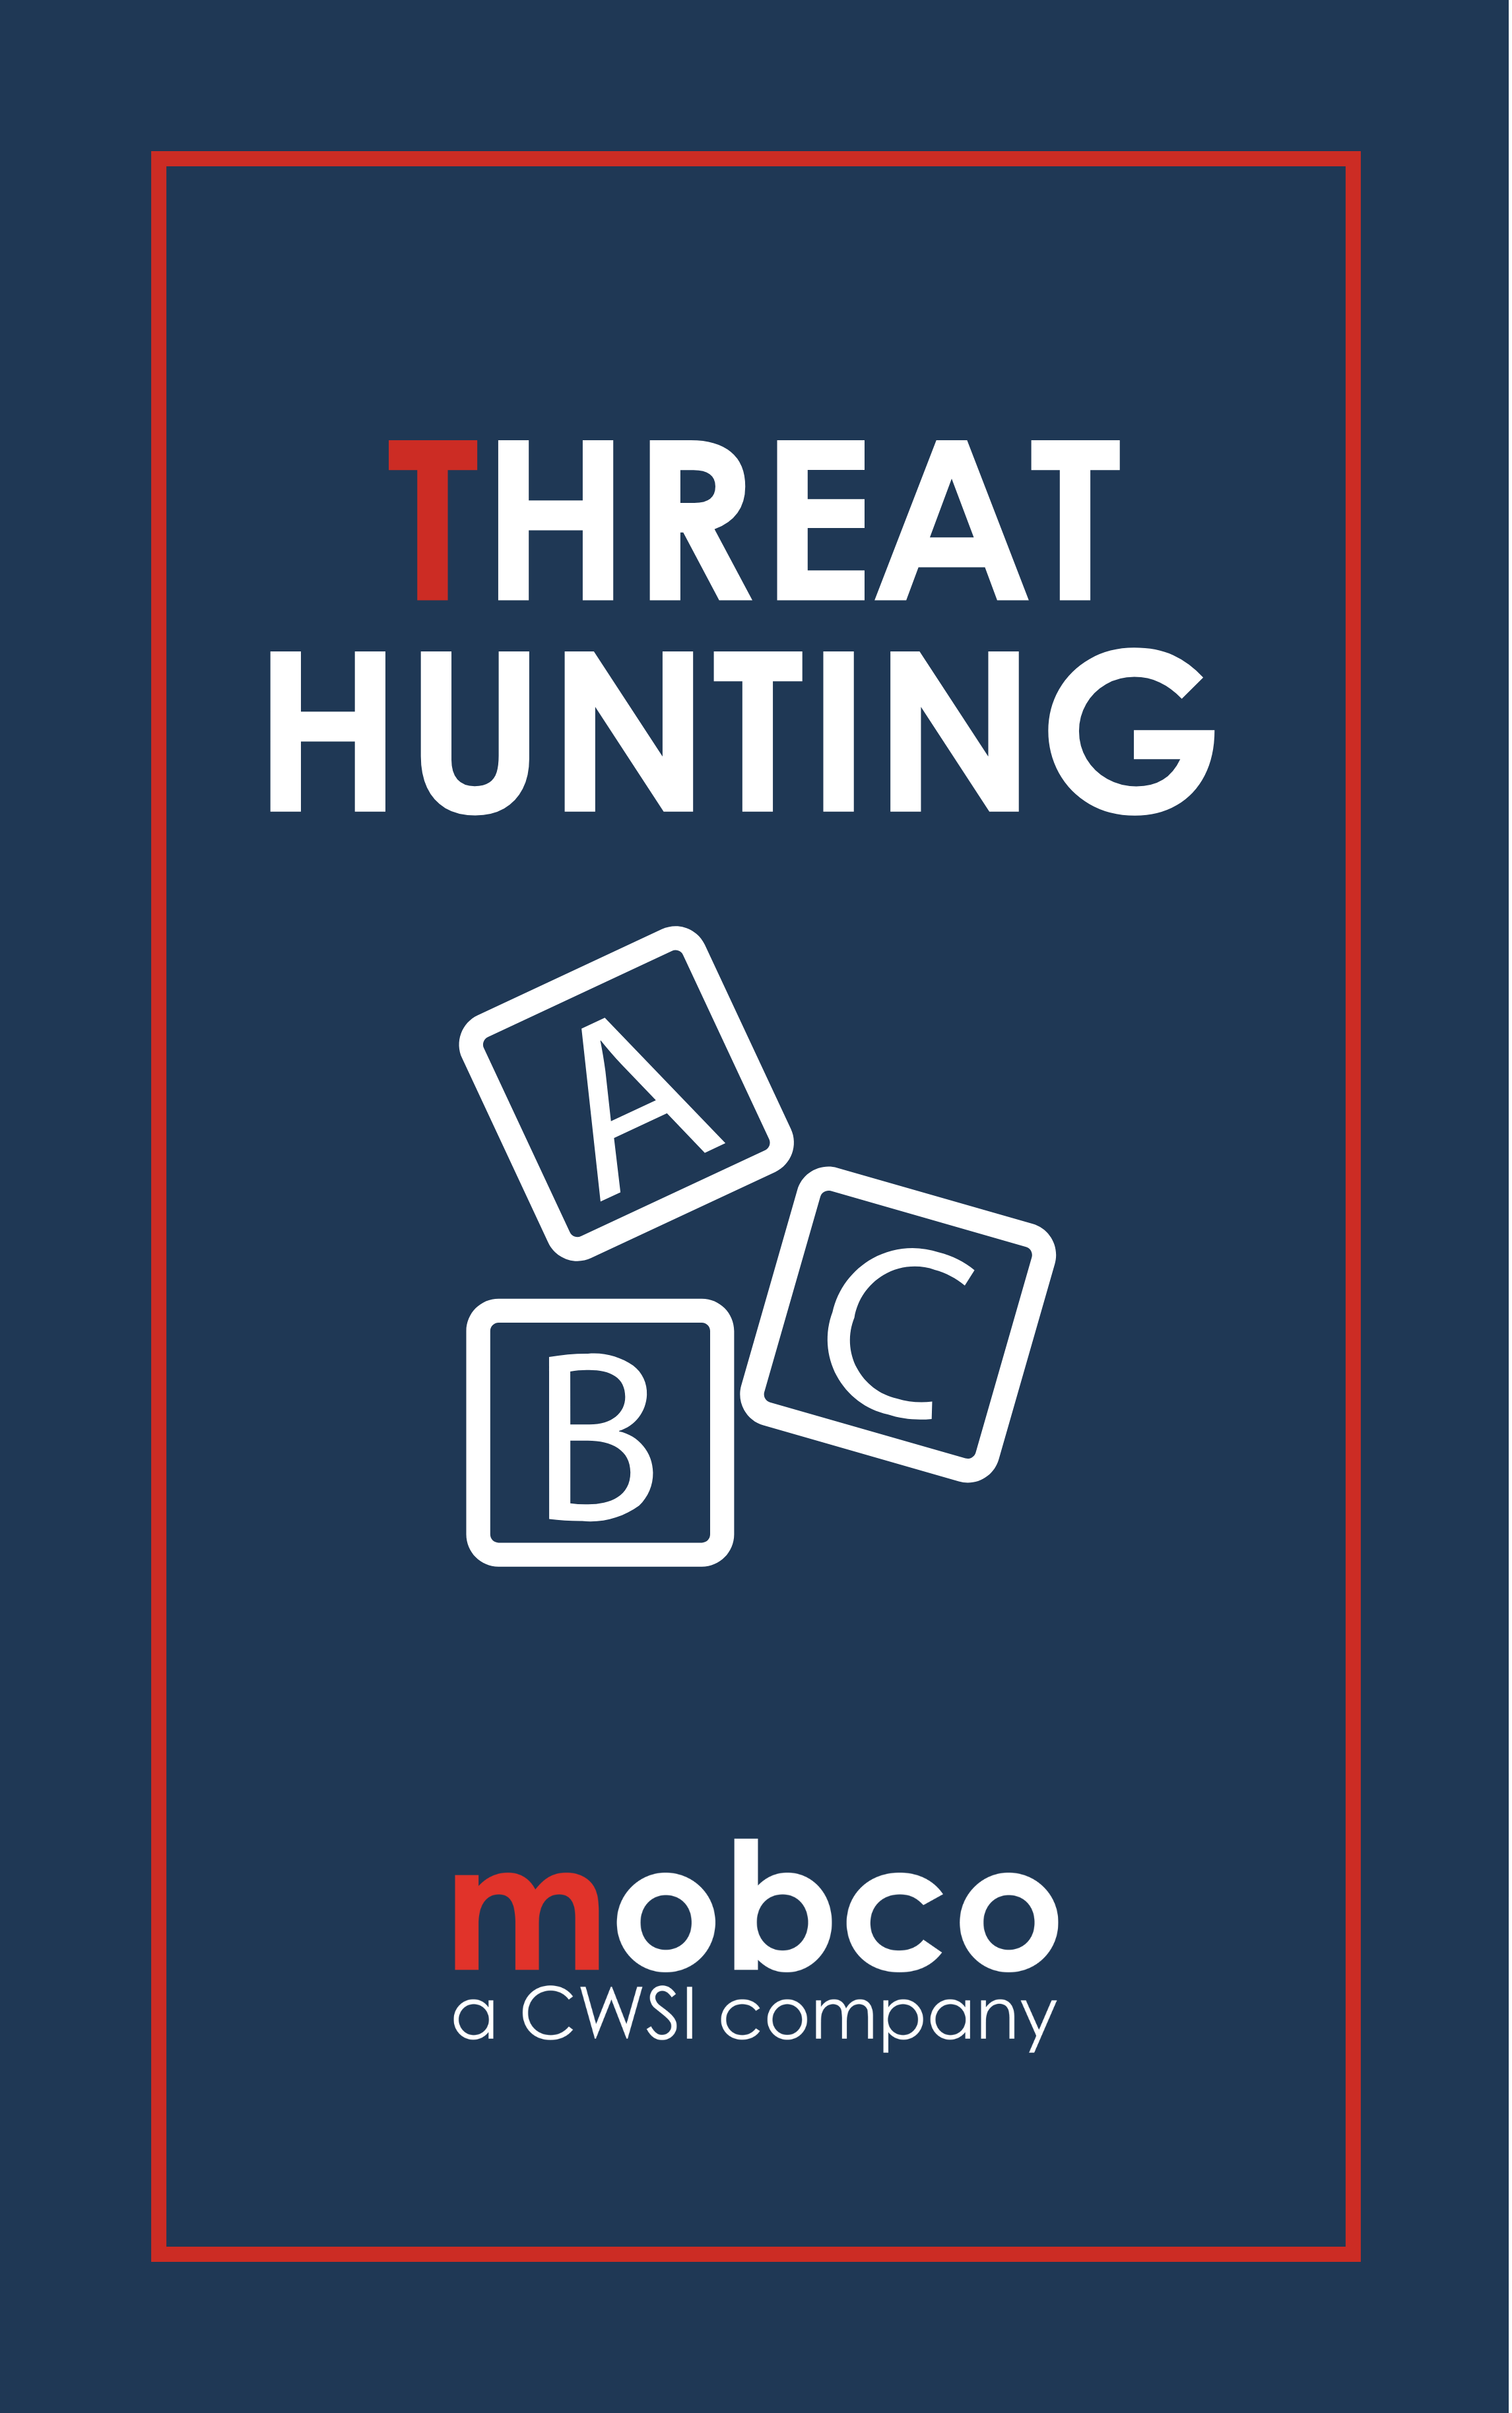 mobco's Threat Hunting ABC's